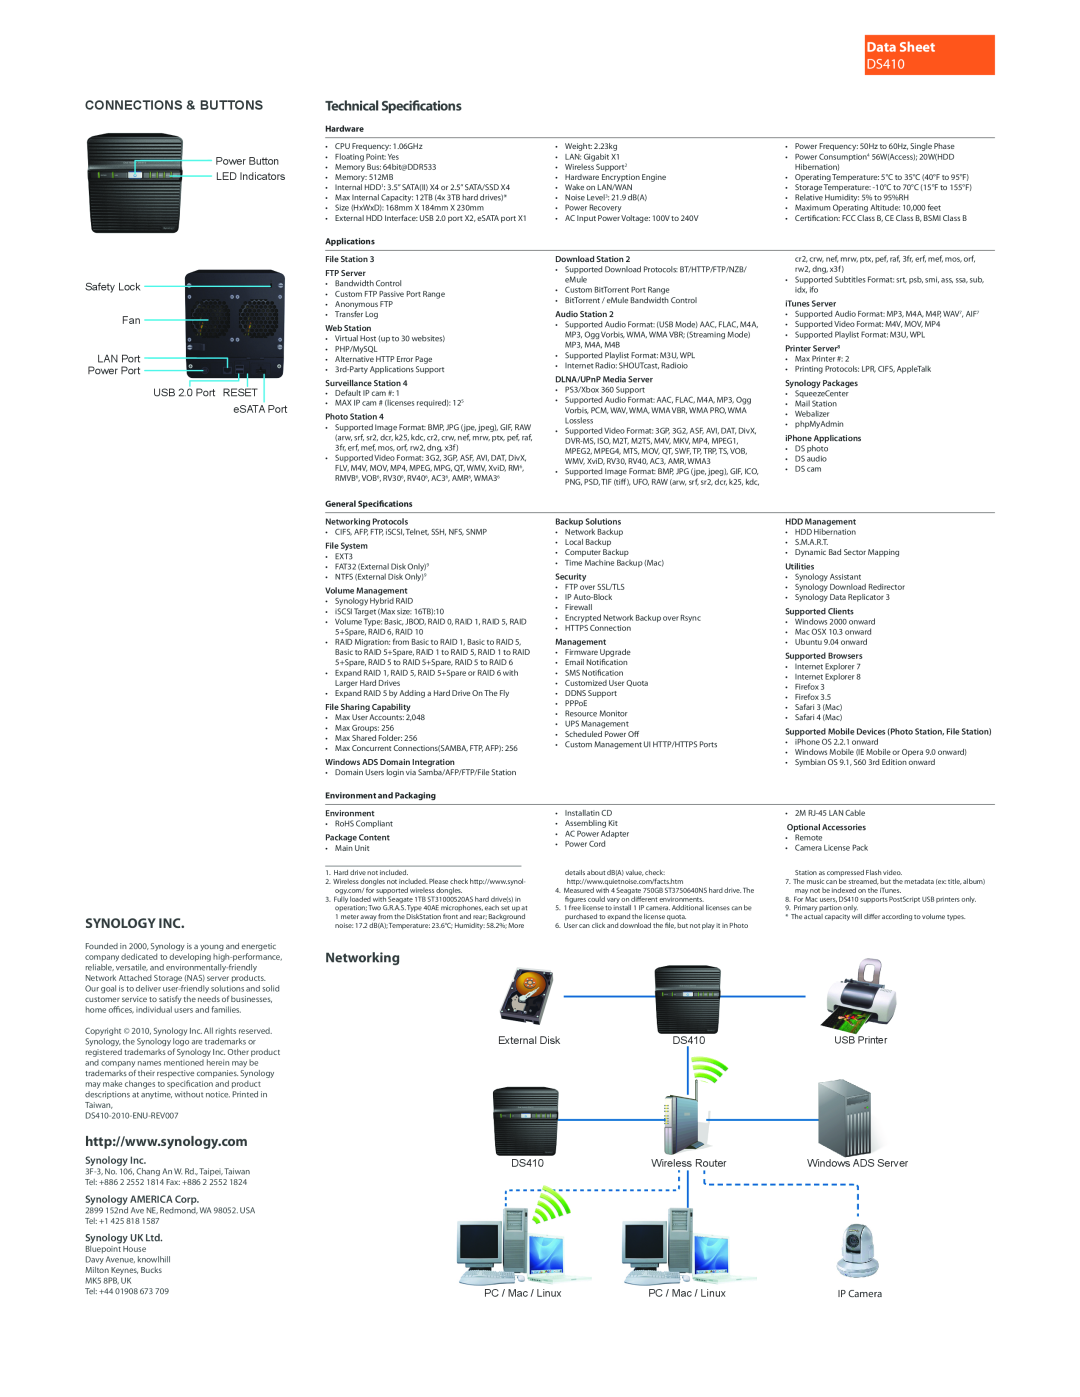 Synology DS410 manual Data Sheet, Technical Specifications, Synology Inc, Networking, Connections & Buttons 